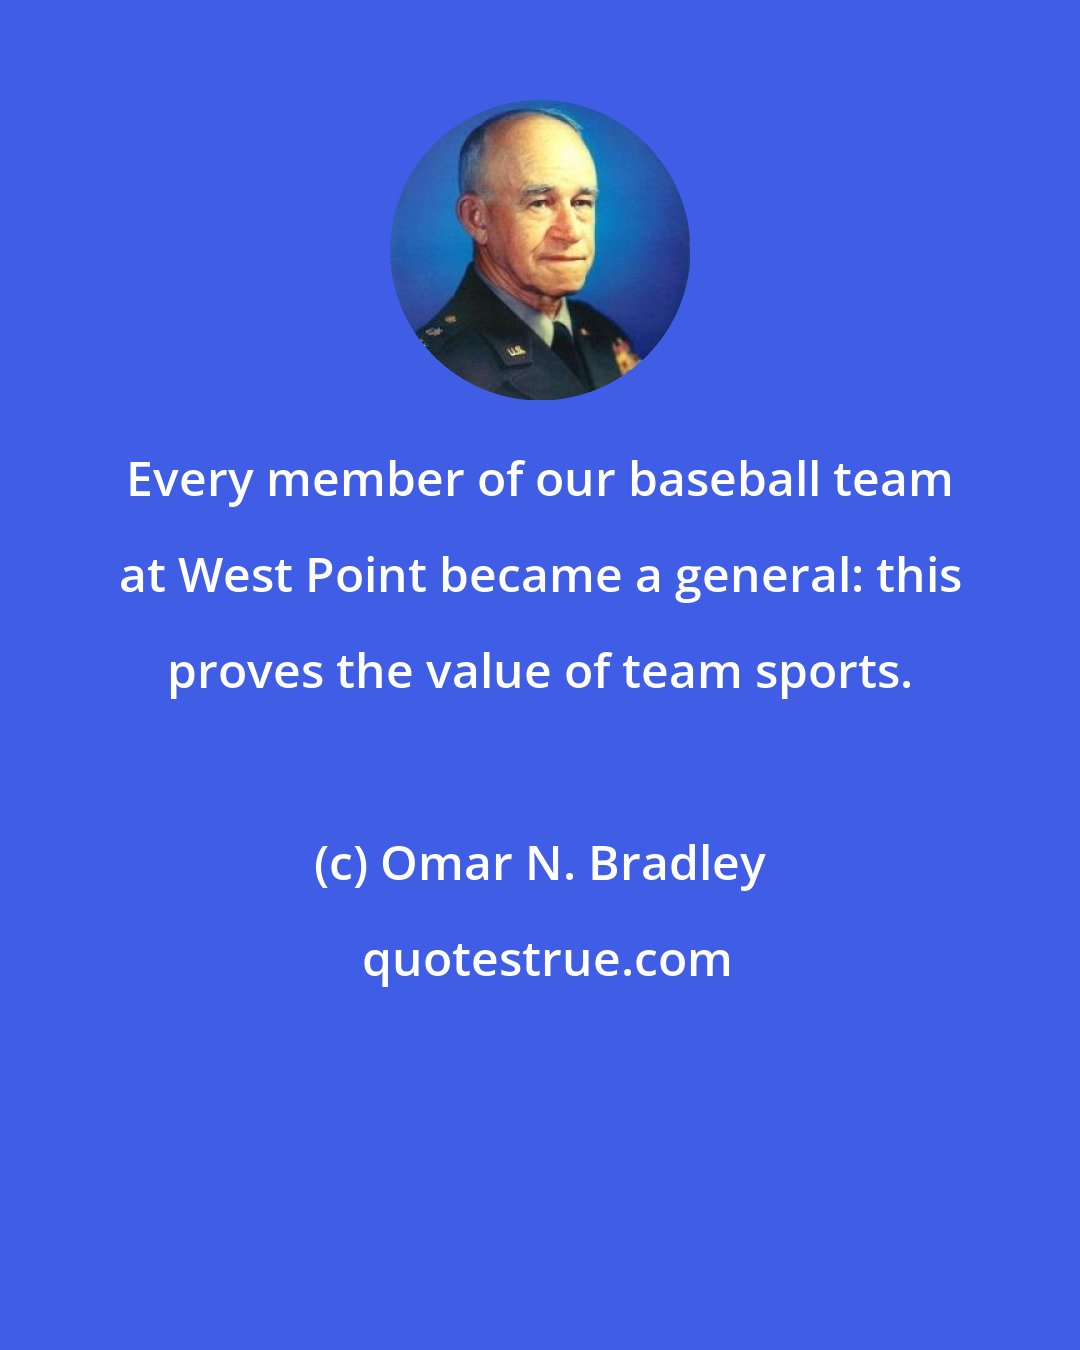 Omar N. Bradley: Every member of our baseball team at West Point became a general: this proves the value of team sports.